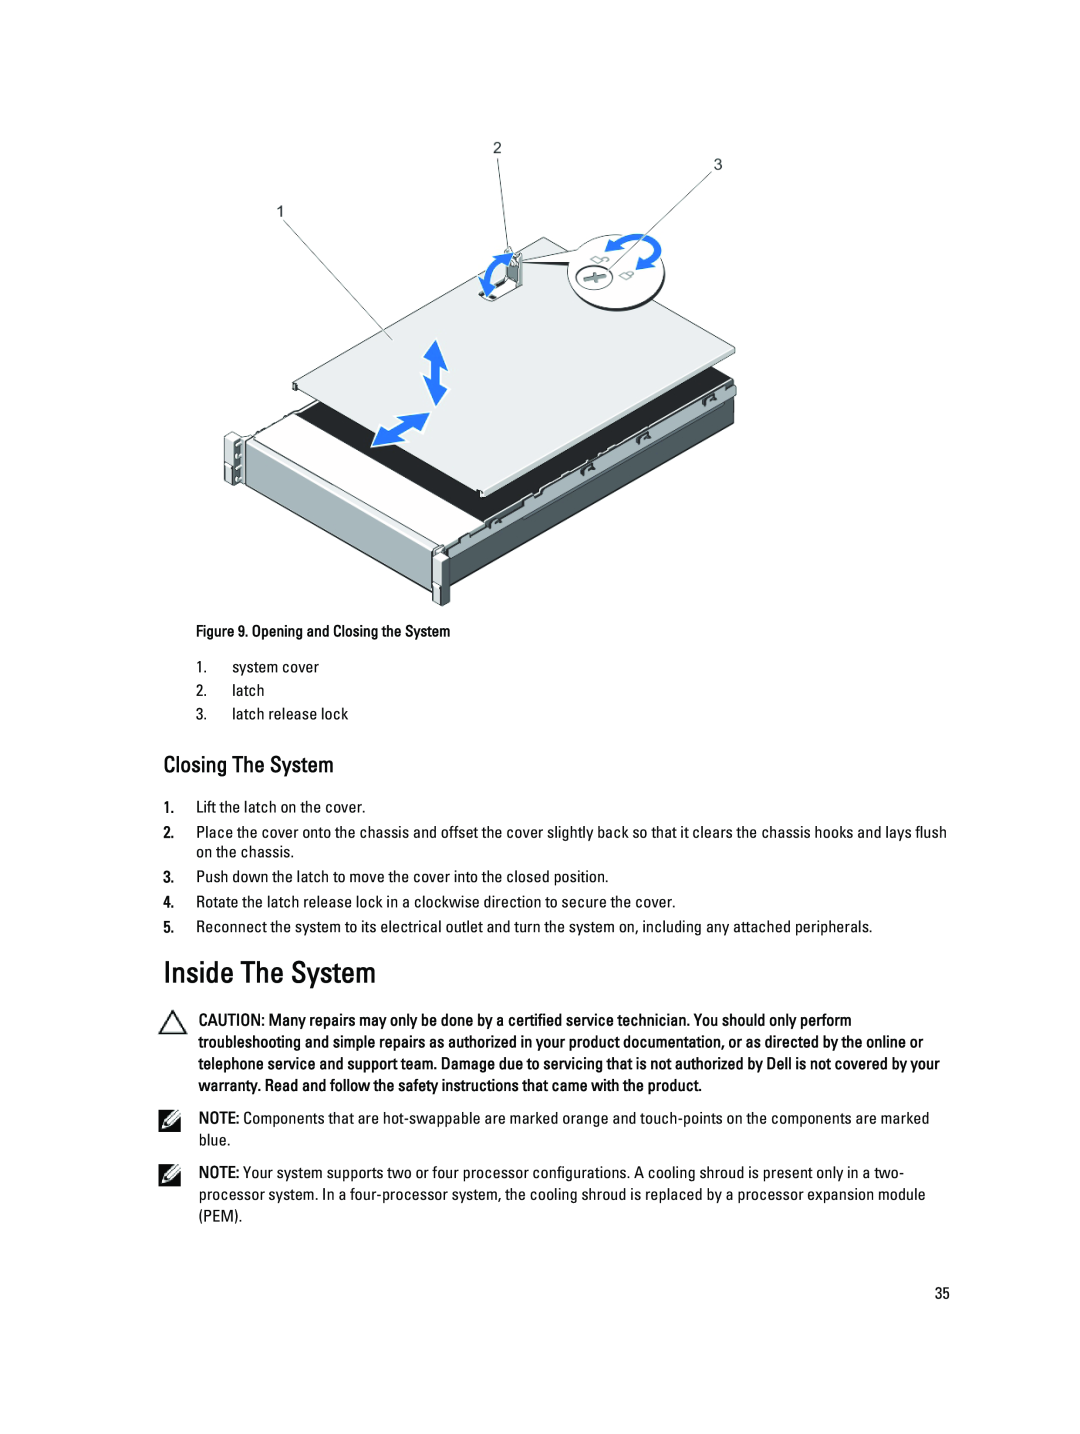 Dell R820 owner manual Inside The System, Closing The System 